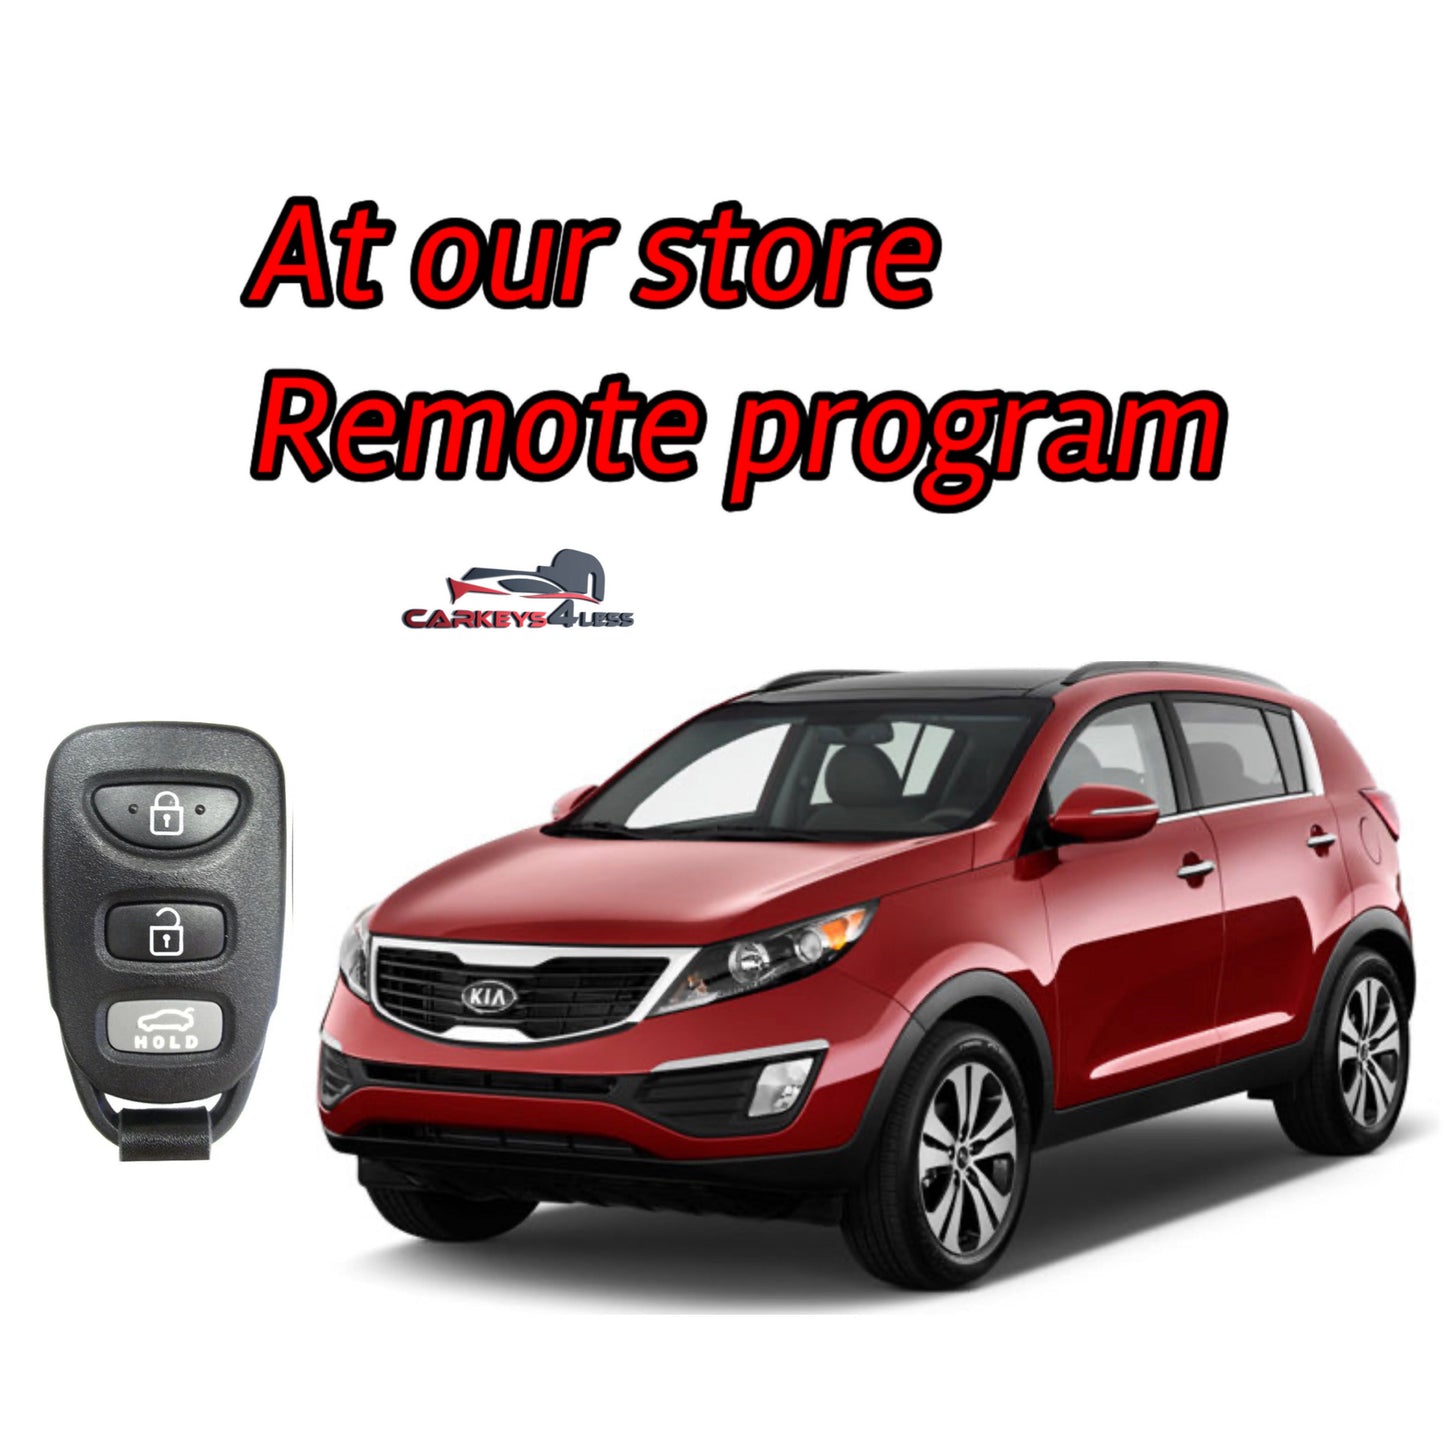 At our store aftermarket remote for kia